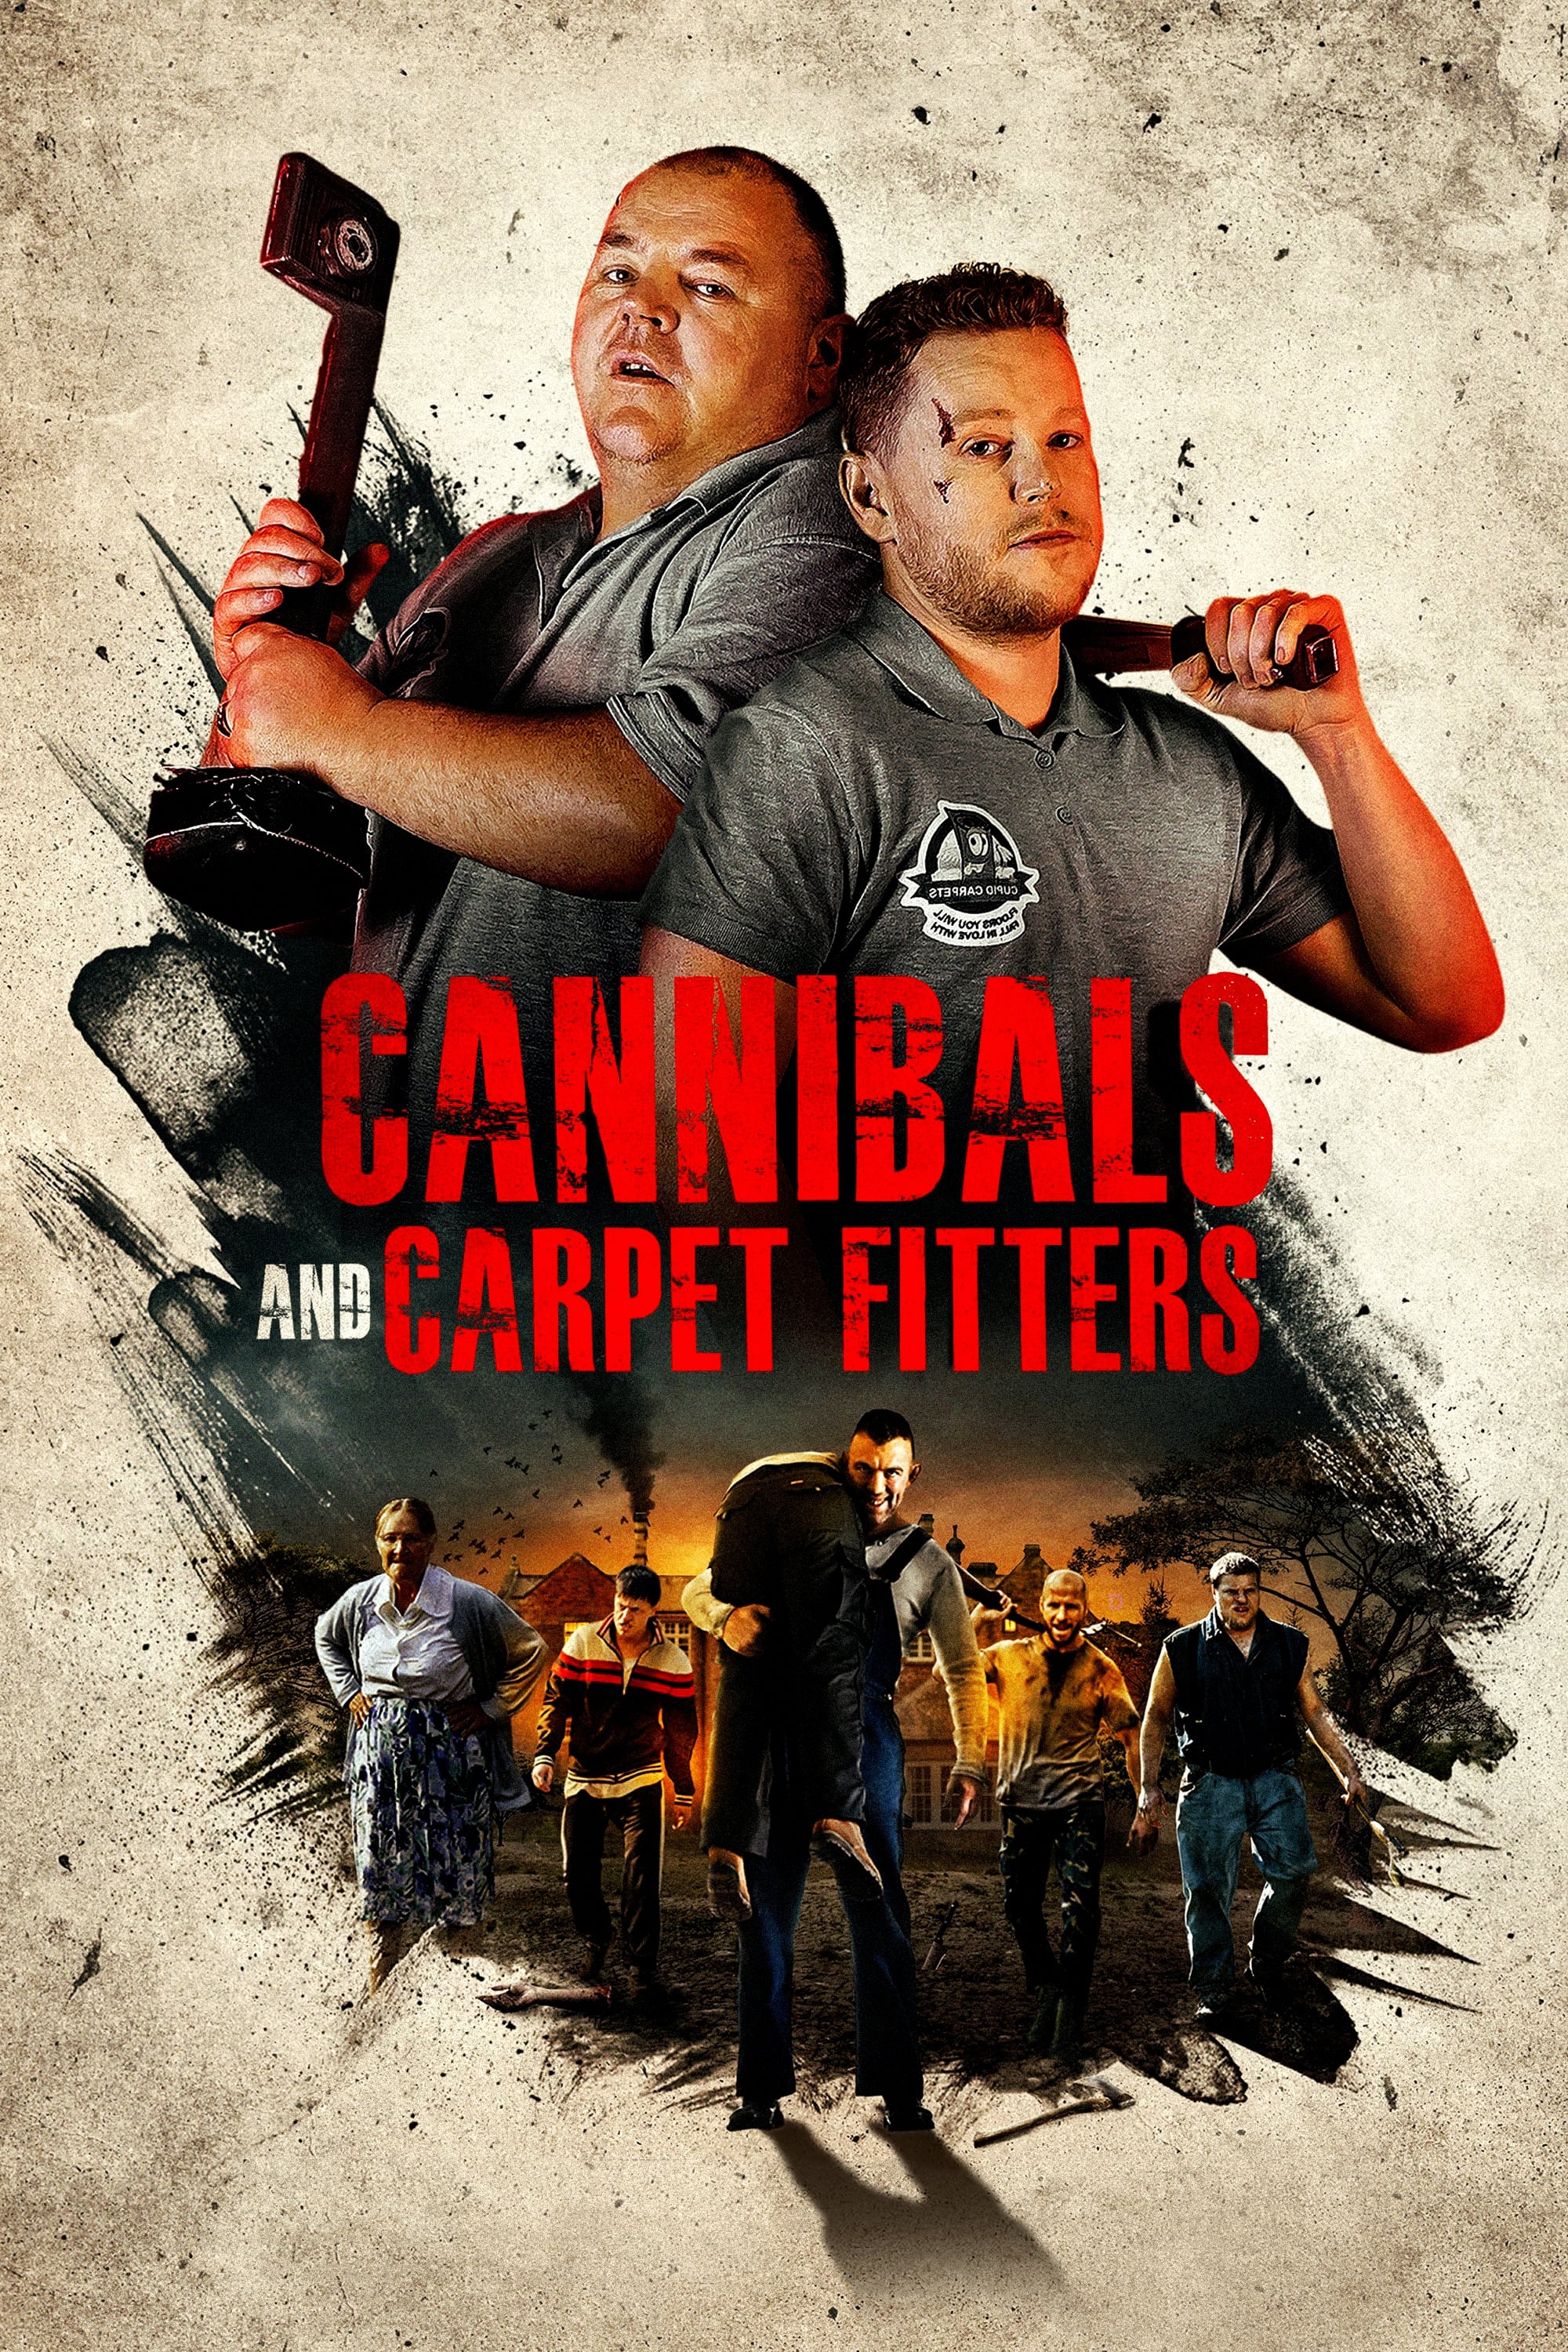 Cannibals and Carpet Fitters (2018)